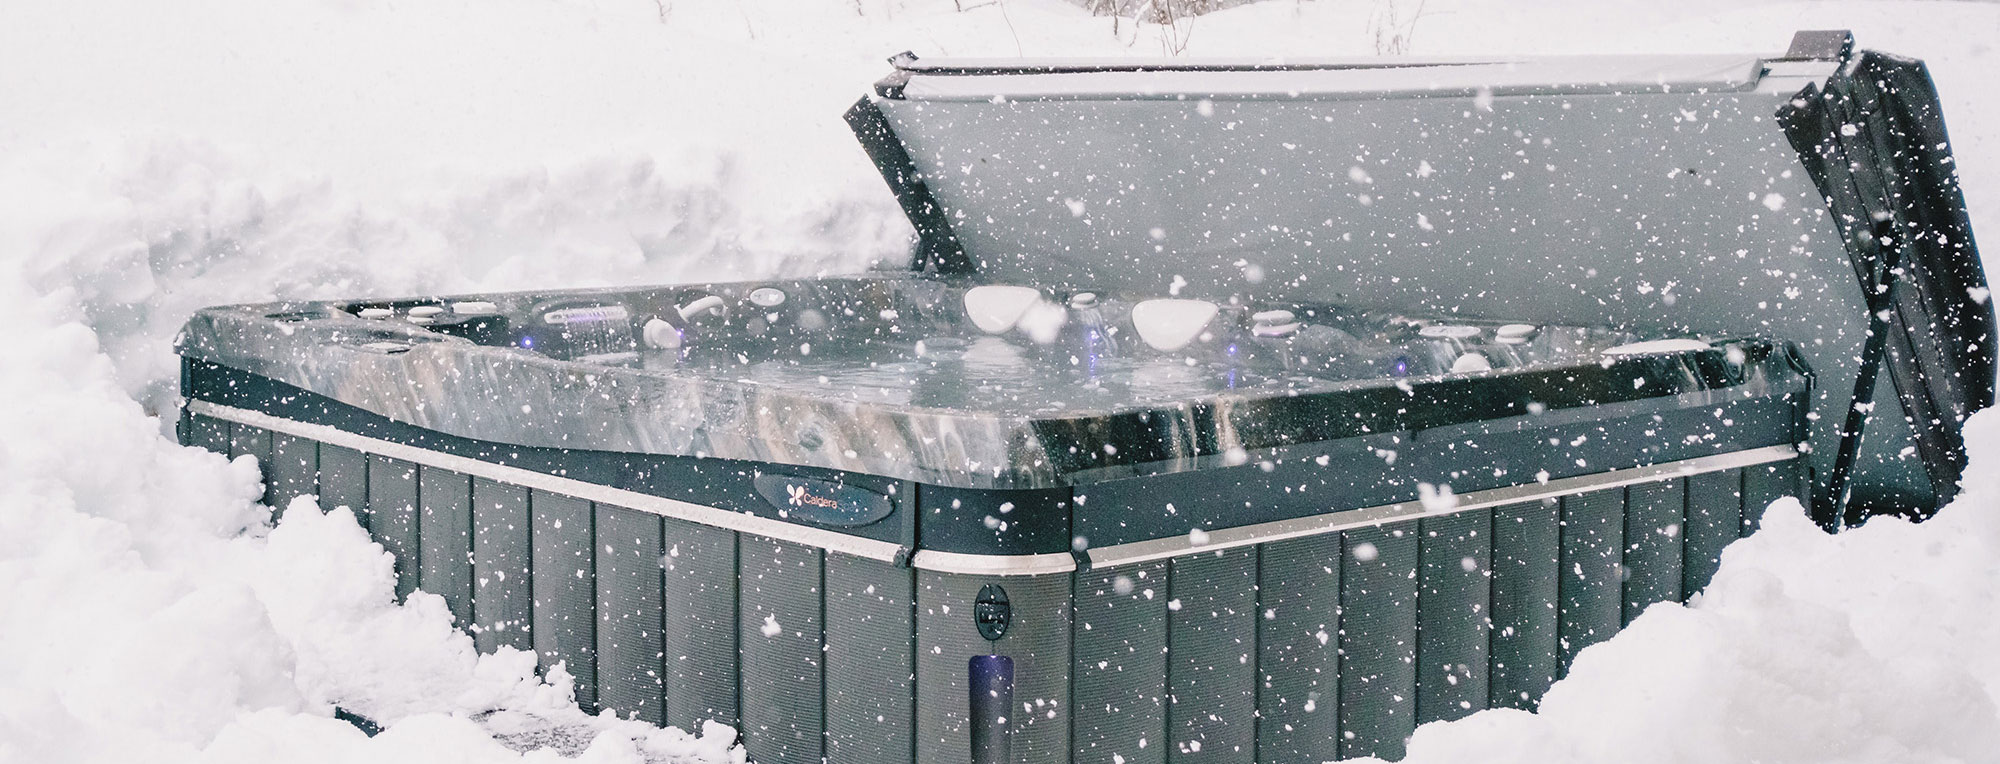 A winter guide for hot tub owners